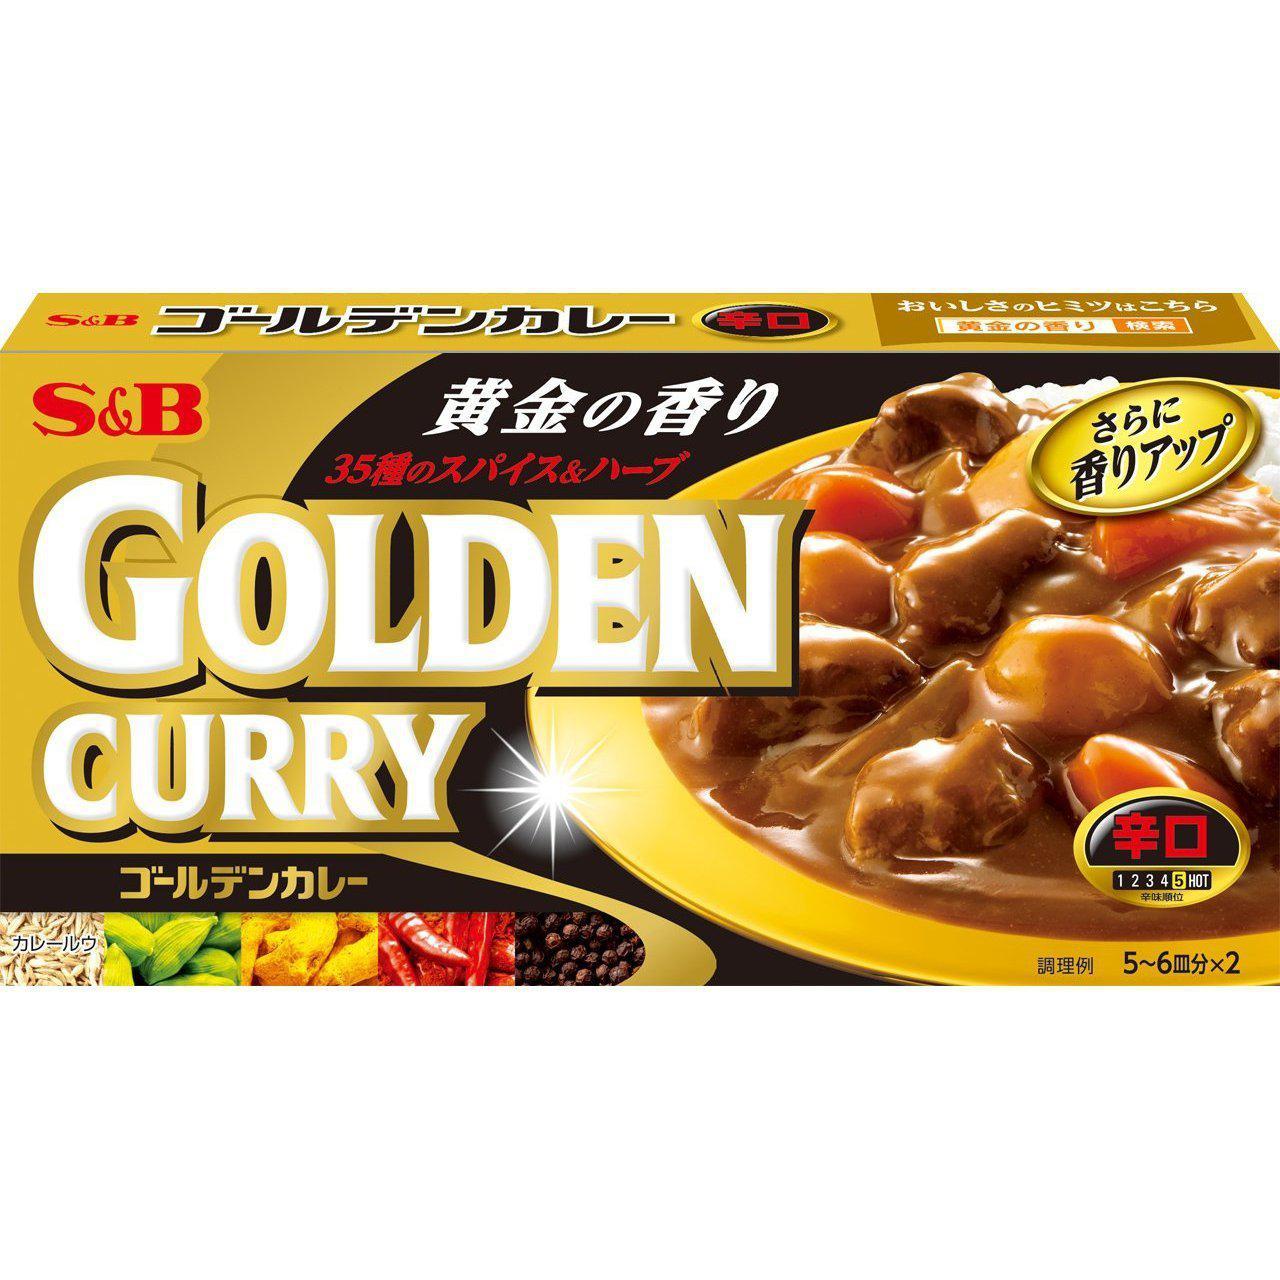 Golden Curry Japanese Curry Sauce Mix, Variety Pack with Hot, Medium Hot,  and Mild Japanese Curry Cube Mix, for Dipping Sauce, Cooking, with Nosh  Pack